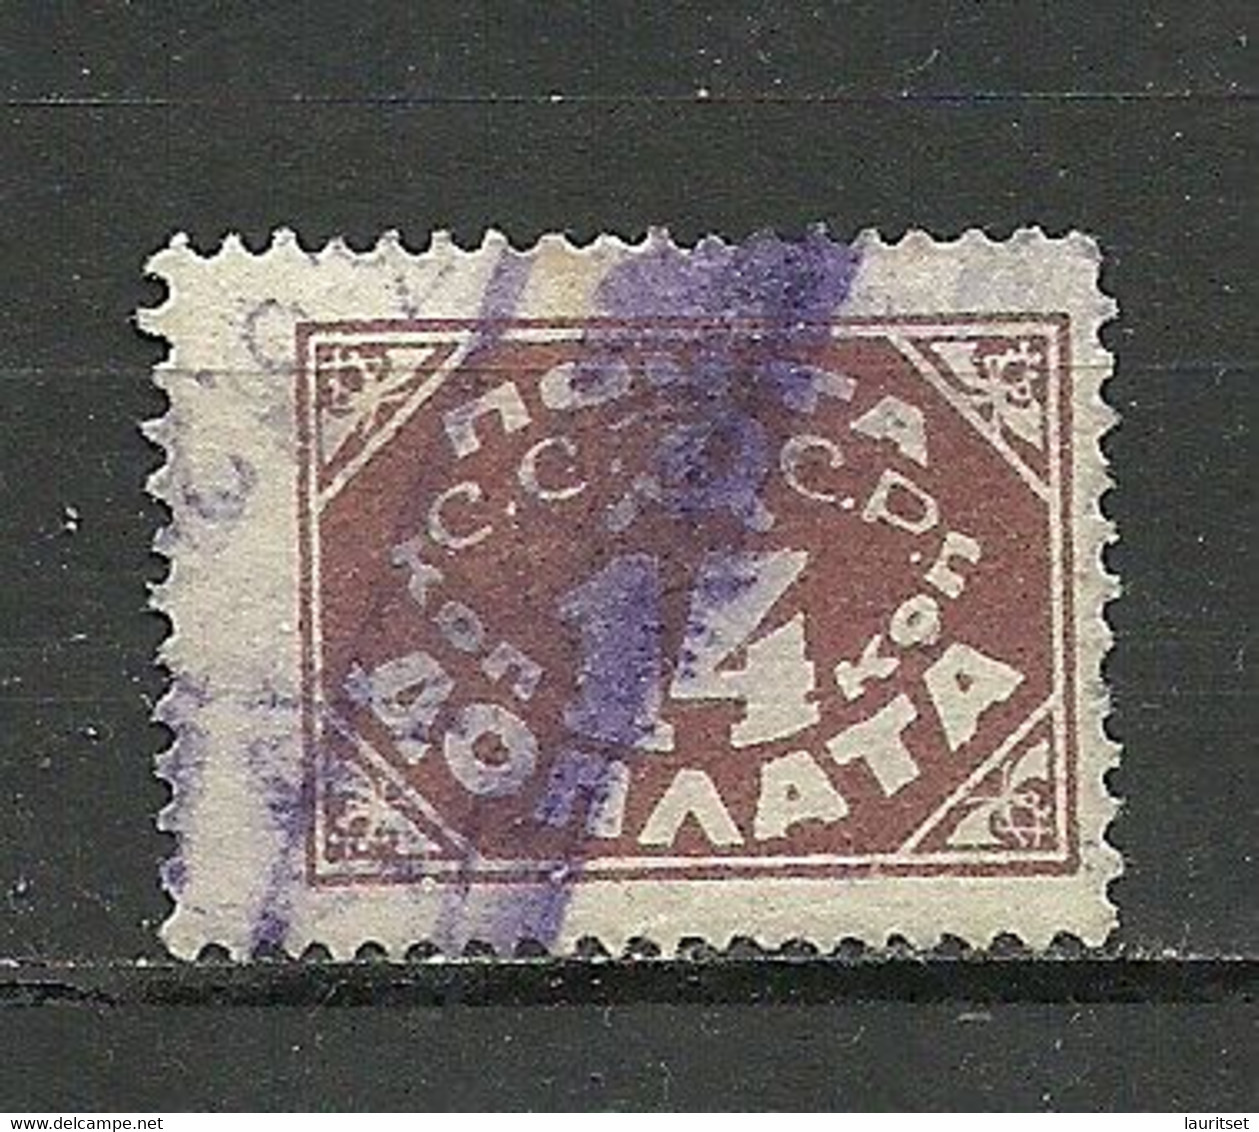 RUSSLAND RUSSIA 1925 Porto Postage Due Michel 17 I B (perf 14 1/2:14 Without WM) O - Postage Due